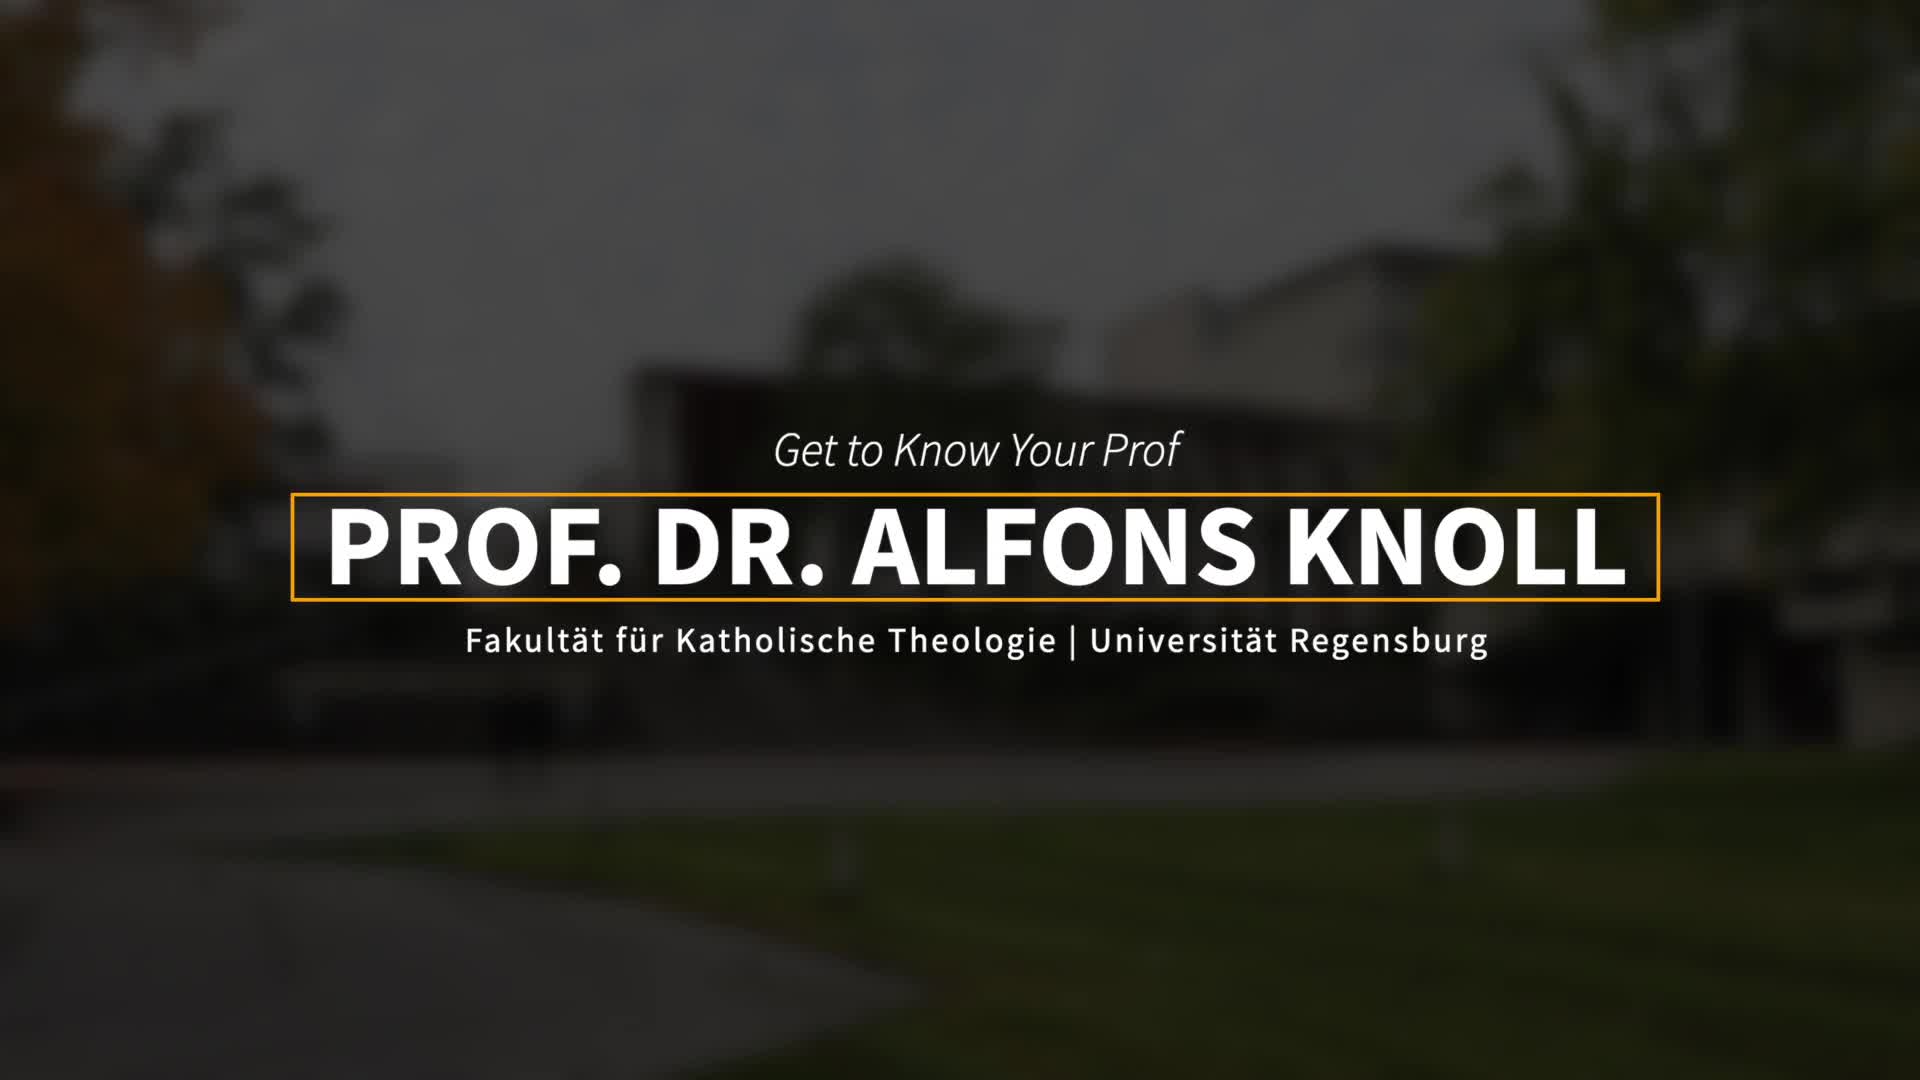 "Get to Know Your Prof" – Prof. Dr. Alfons Knoll (Fundamentaltheologie)